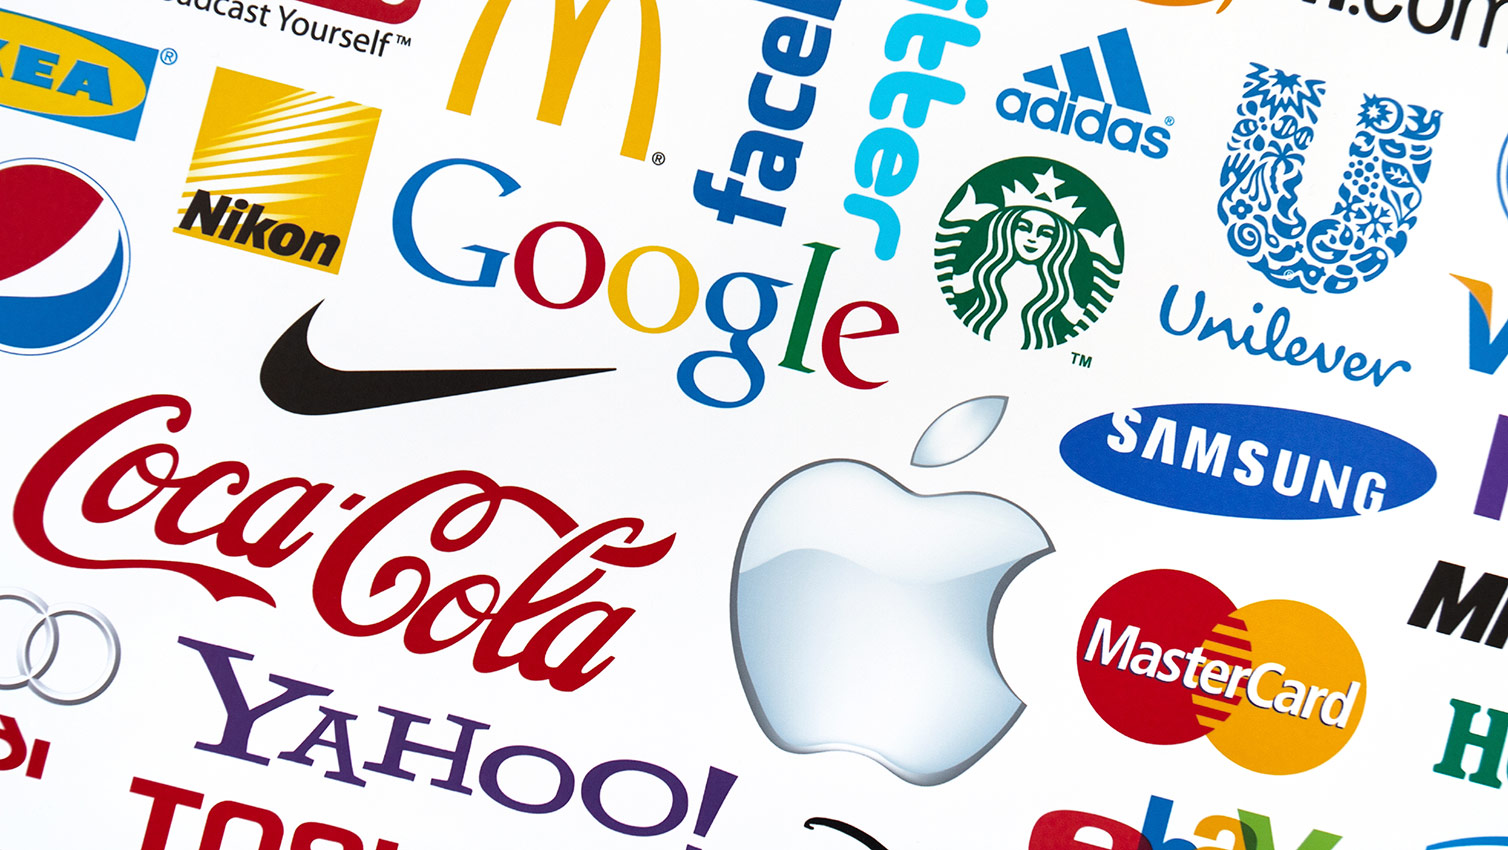 4 Attributes that Strengthen Your Visual Brand Identity